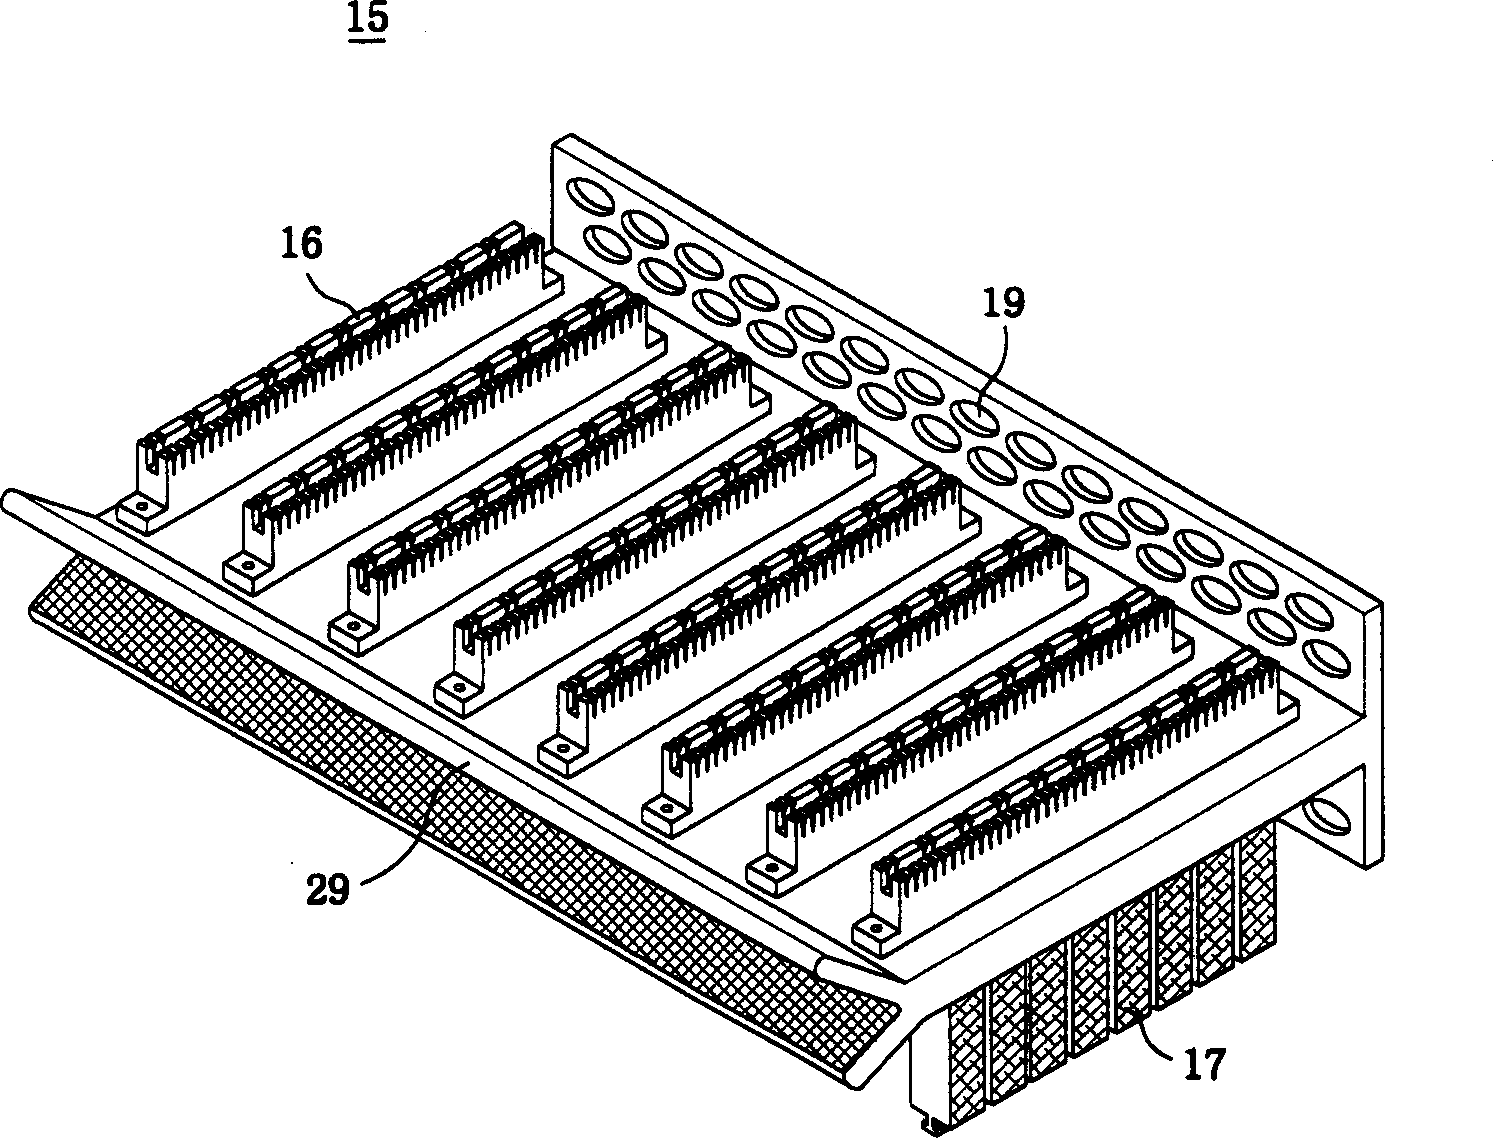 Separator used in asymmetric data user line ADSL and wiring method